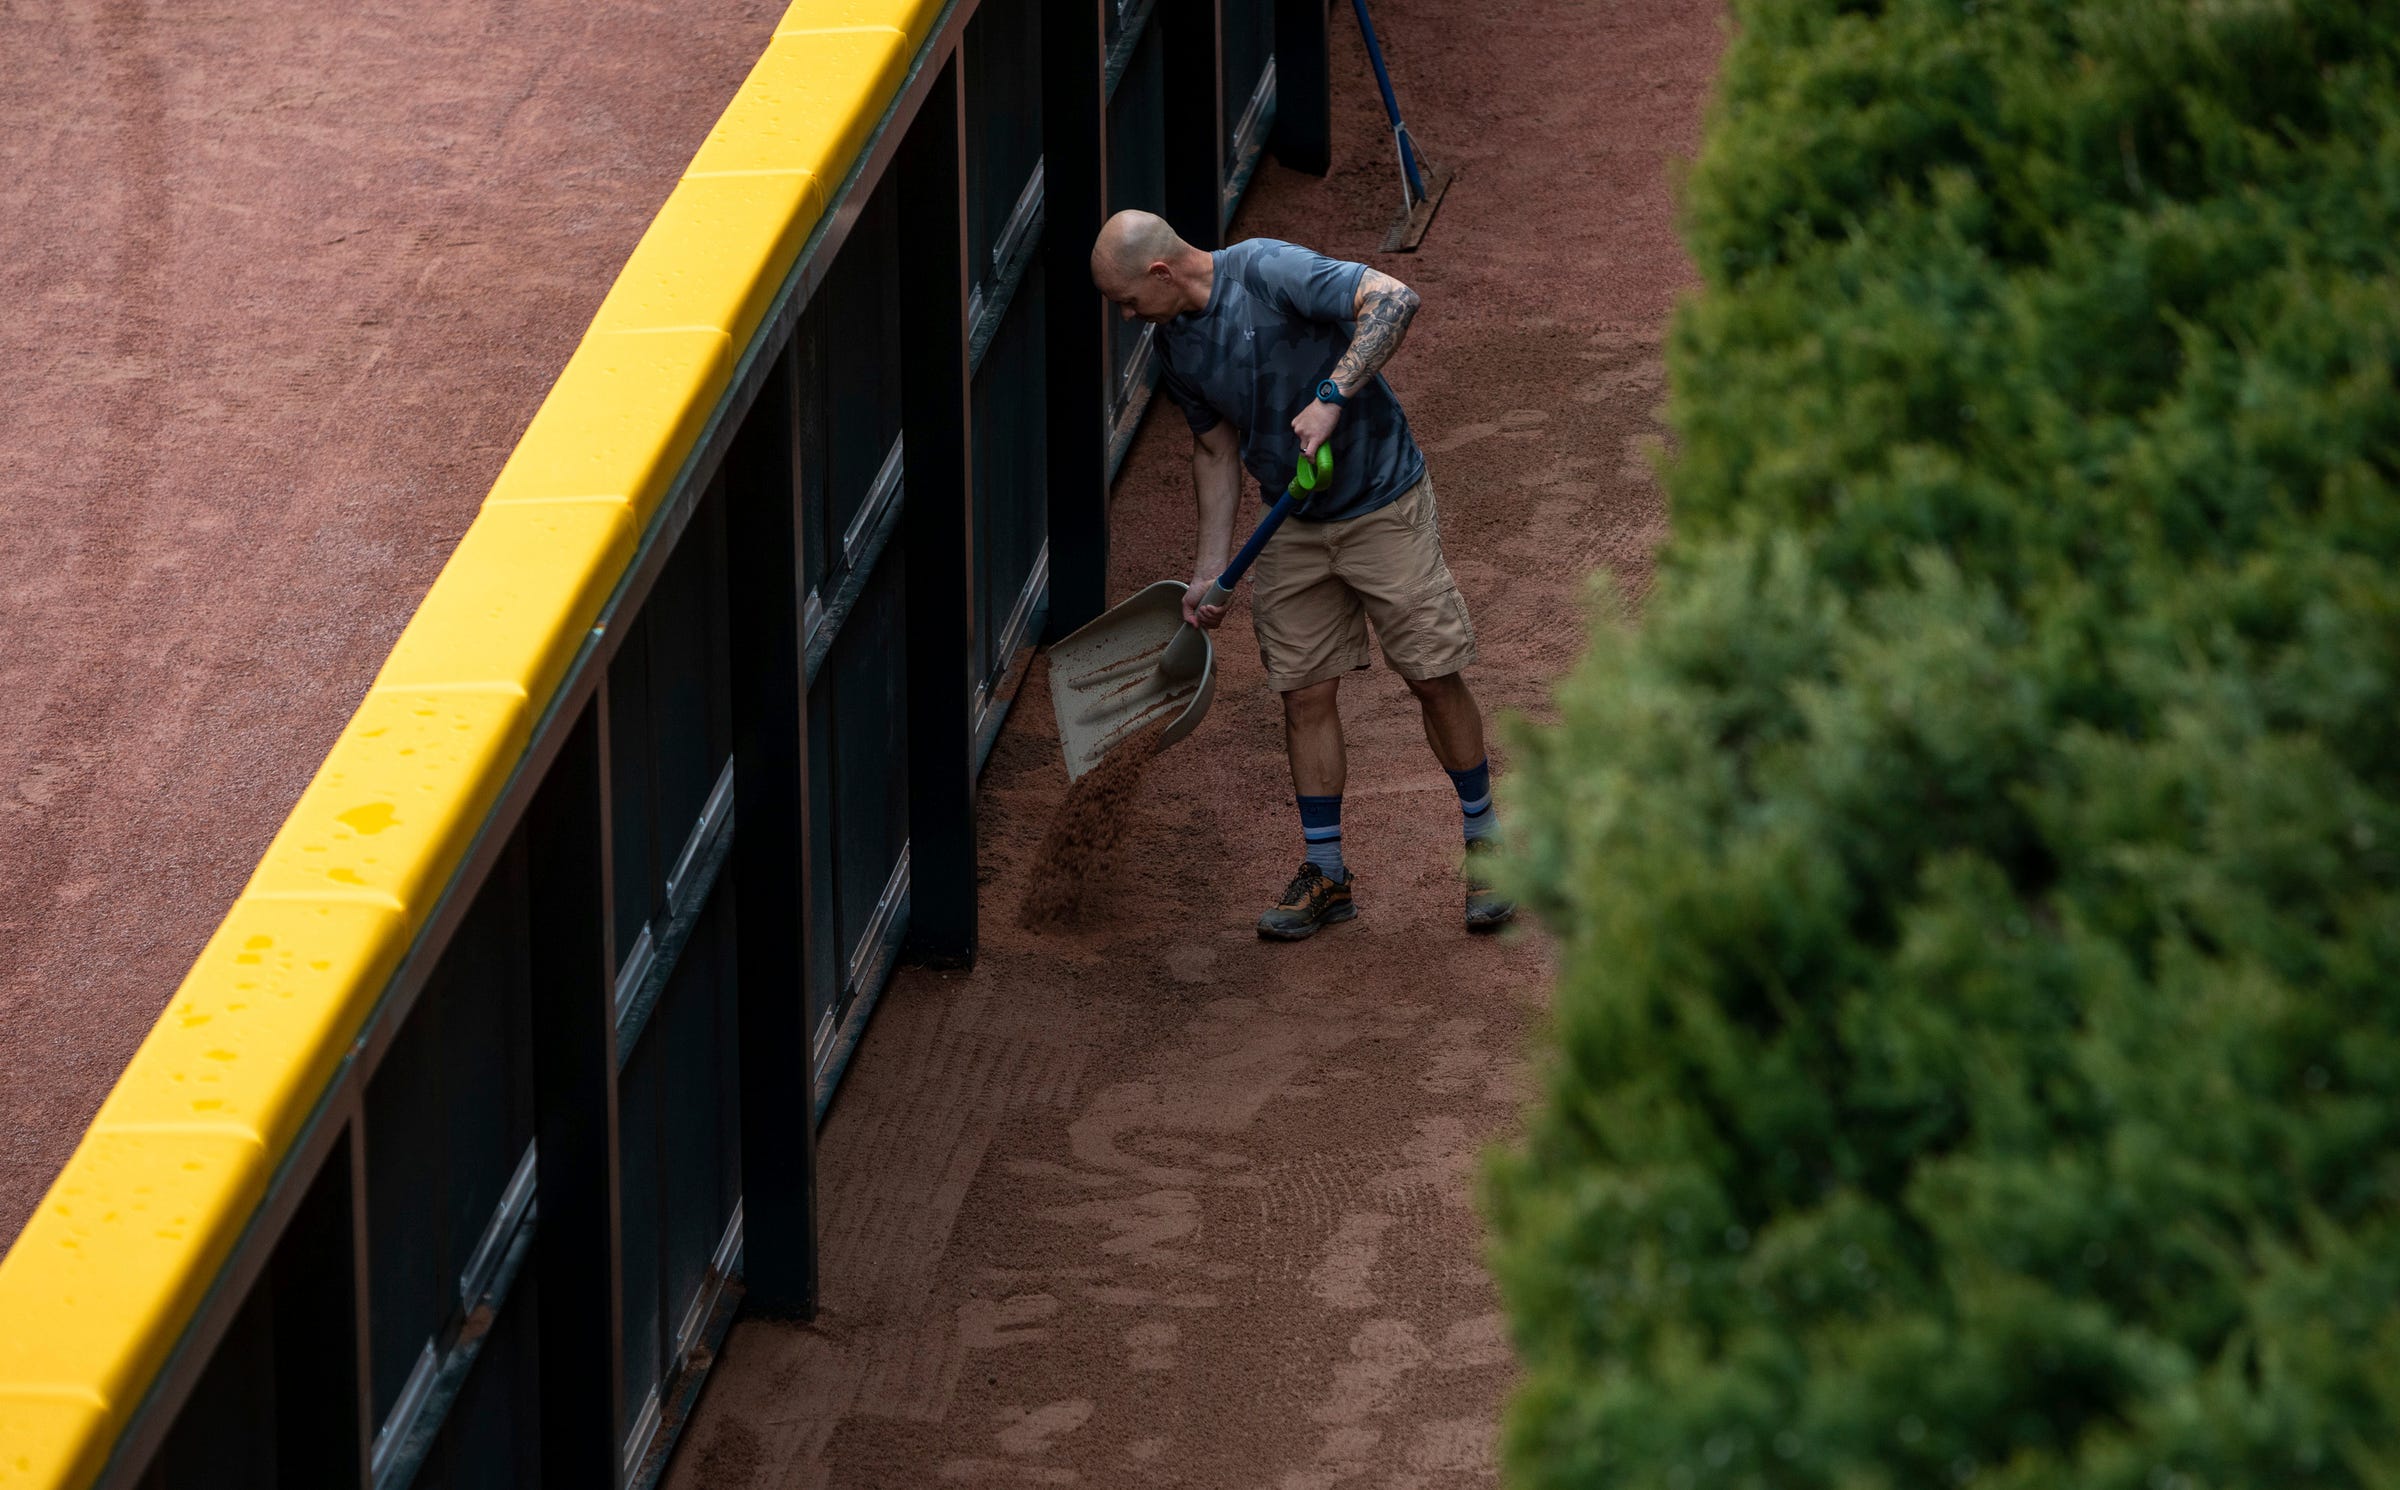 A member of the grounds crew uses a shovel to pour dirt behind the outfield walls of Comerica Park during Opening Day preparations on Wednesday, April 5, 2023.